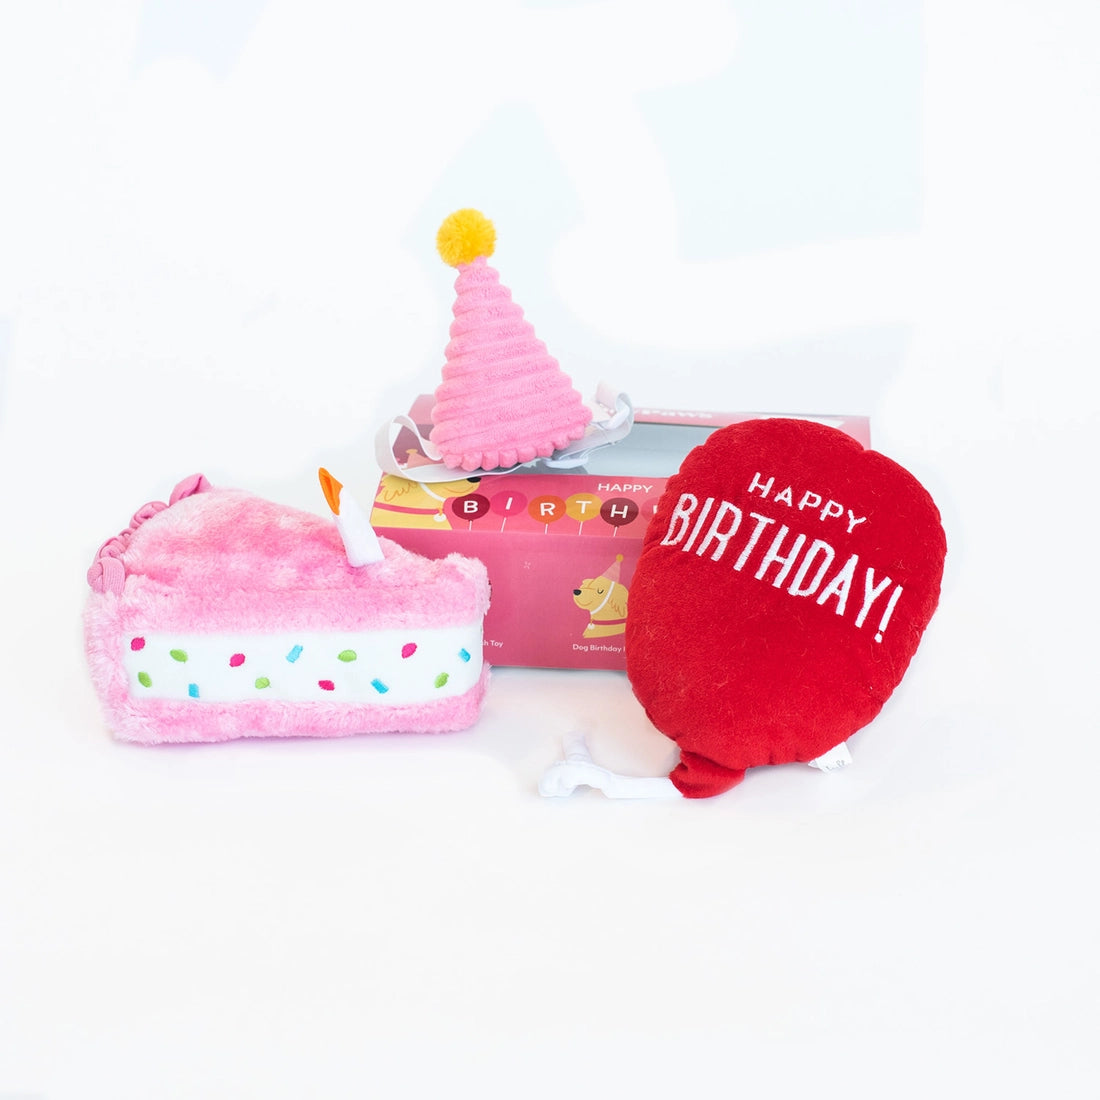 dog birthday box with a pink, plush cake slice, soft pink party hat, and a plush red happy birthday balloon toy